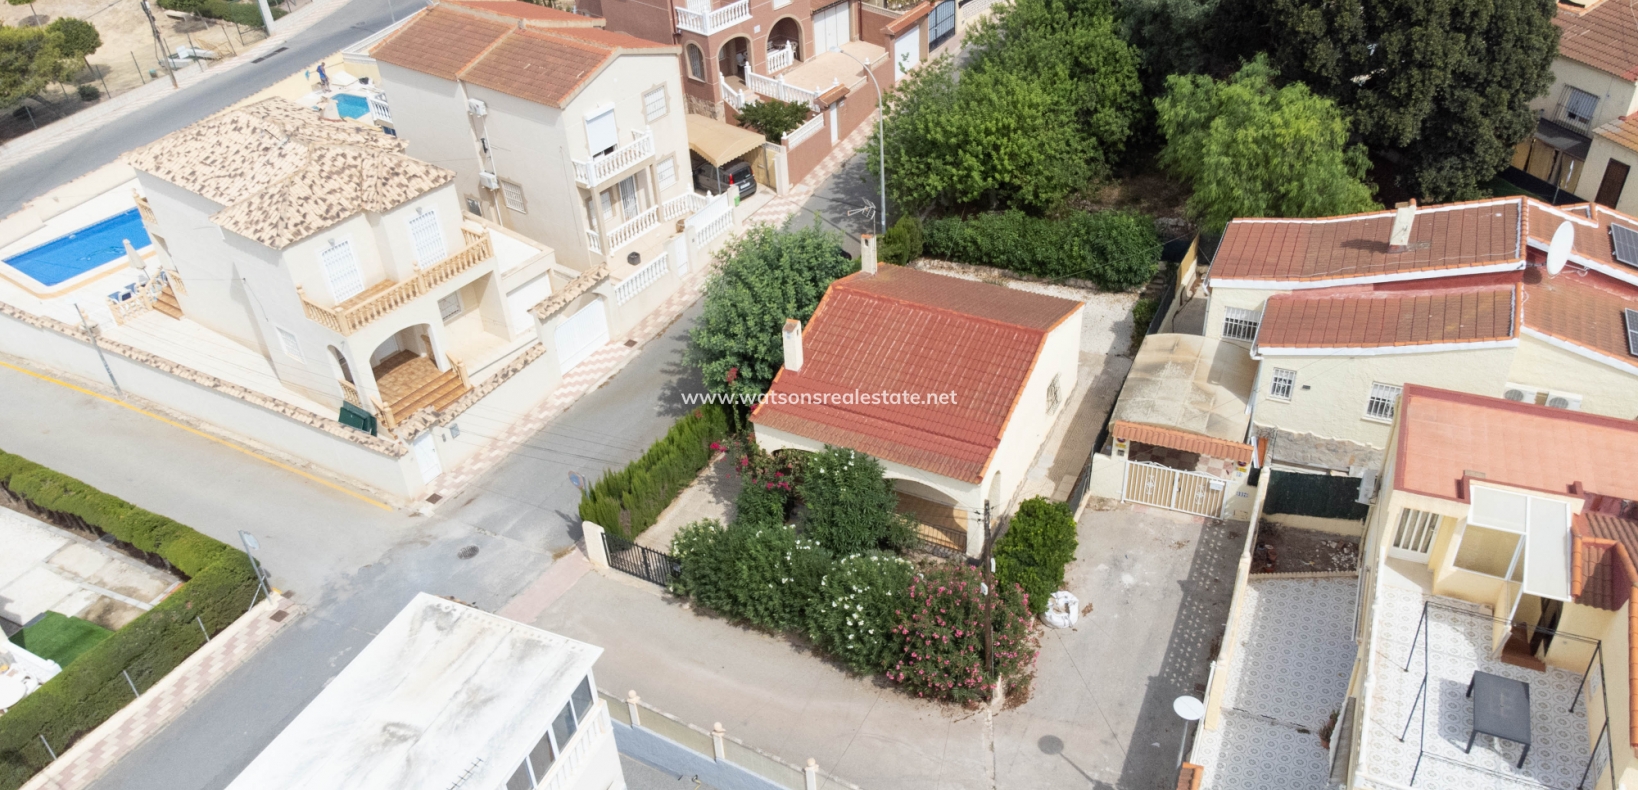 Detached property for sale in Alicante